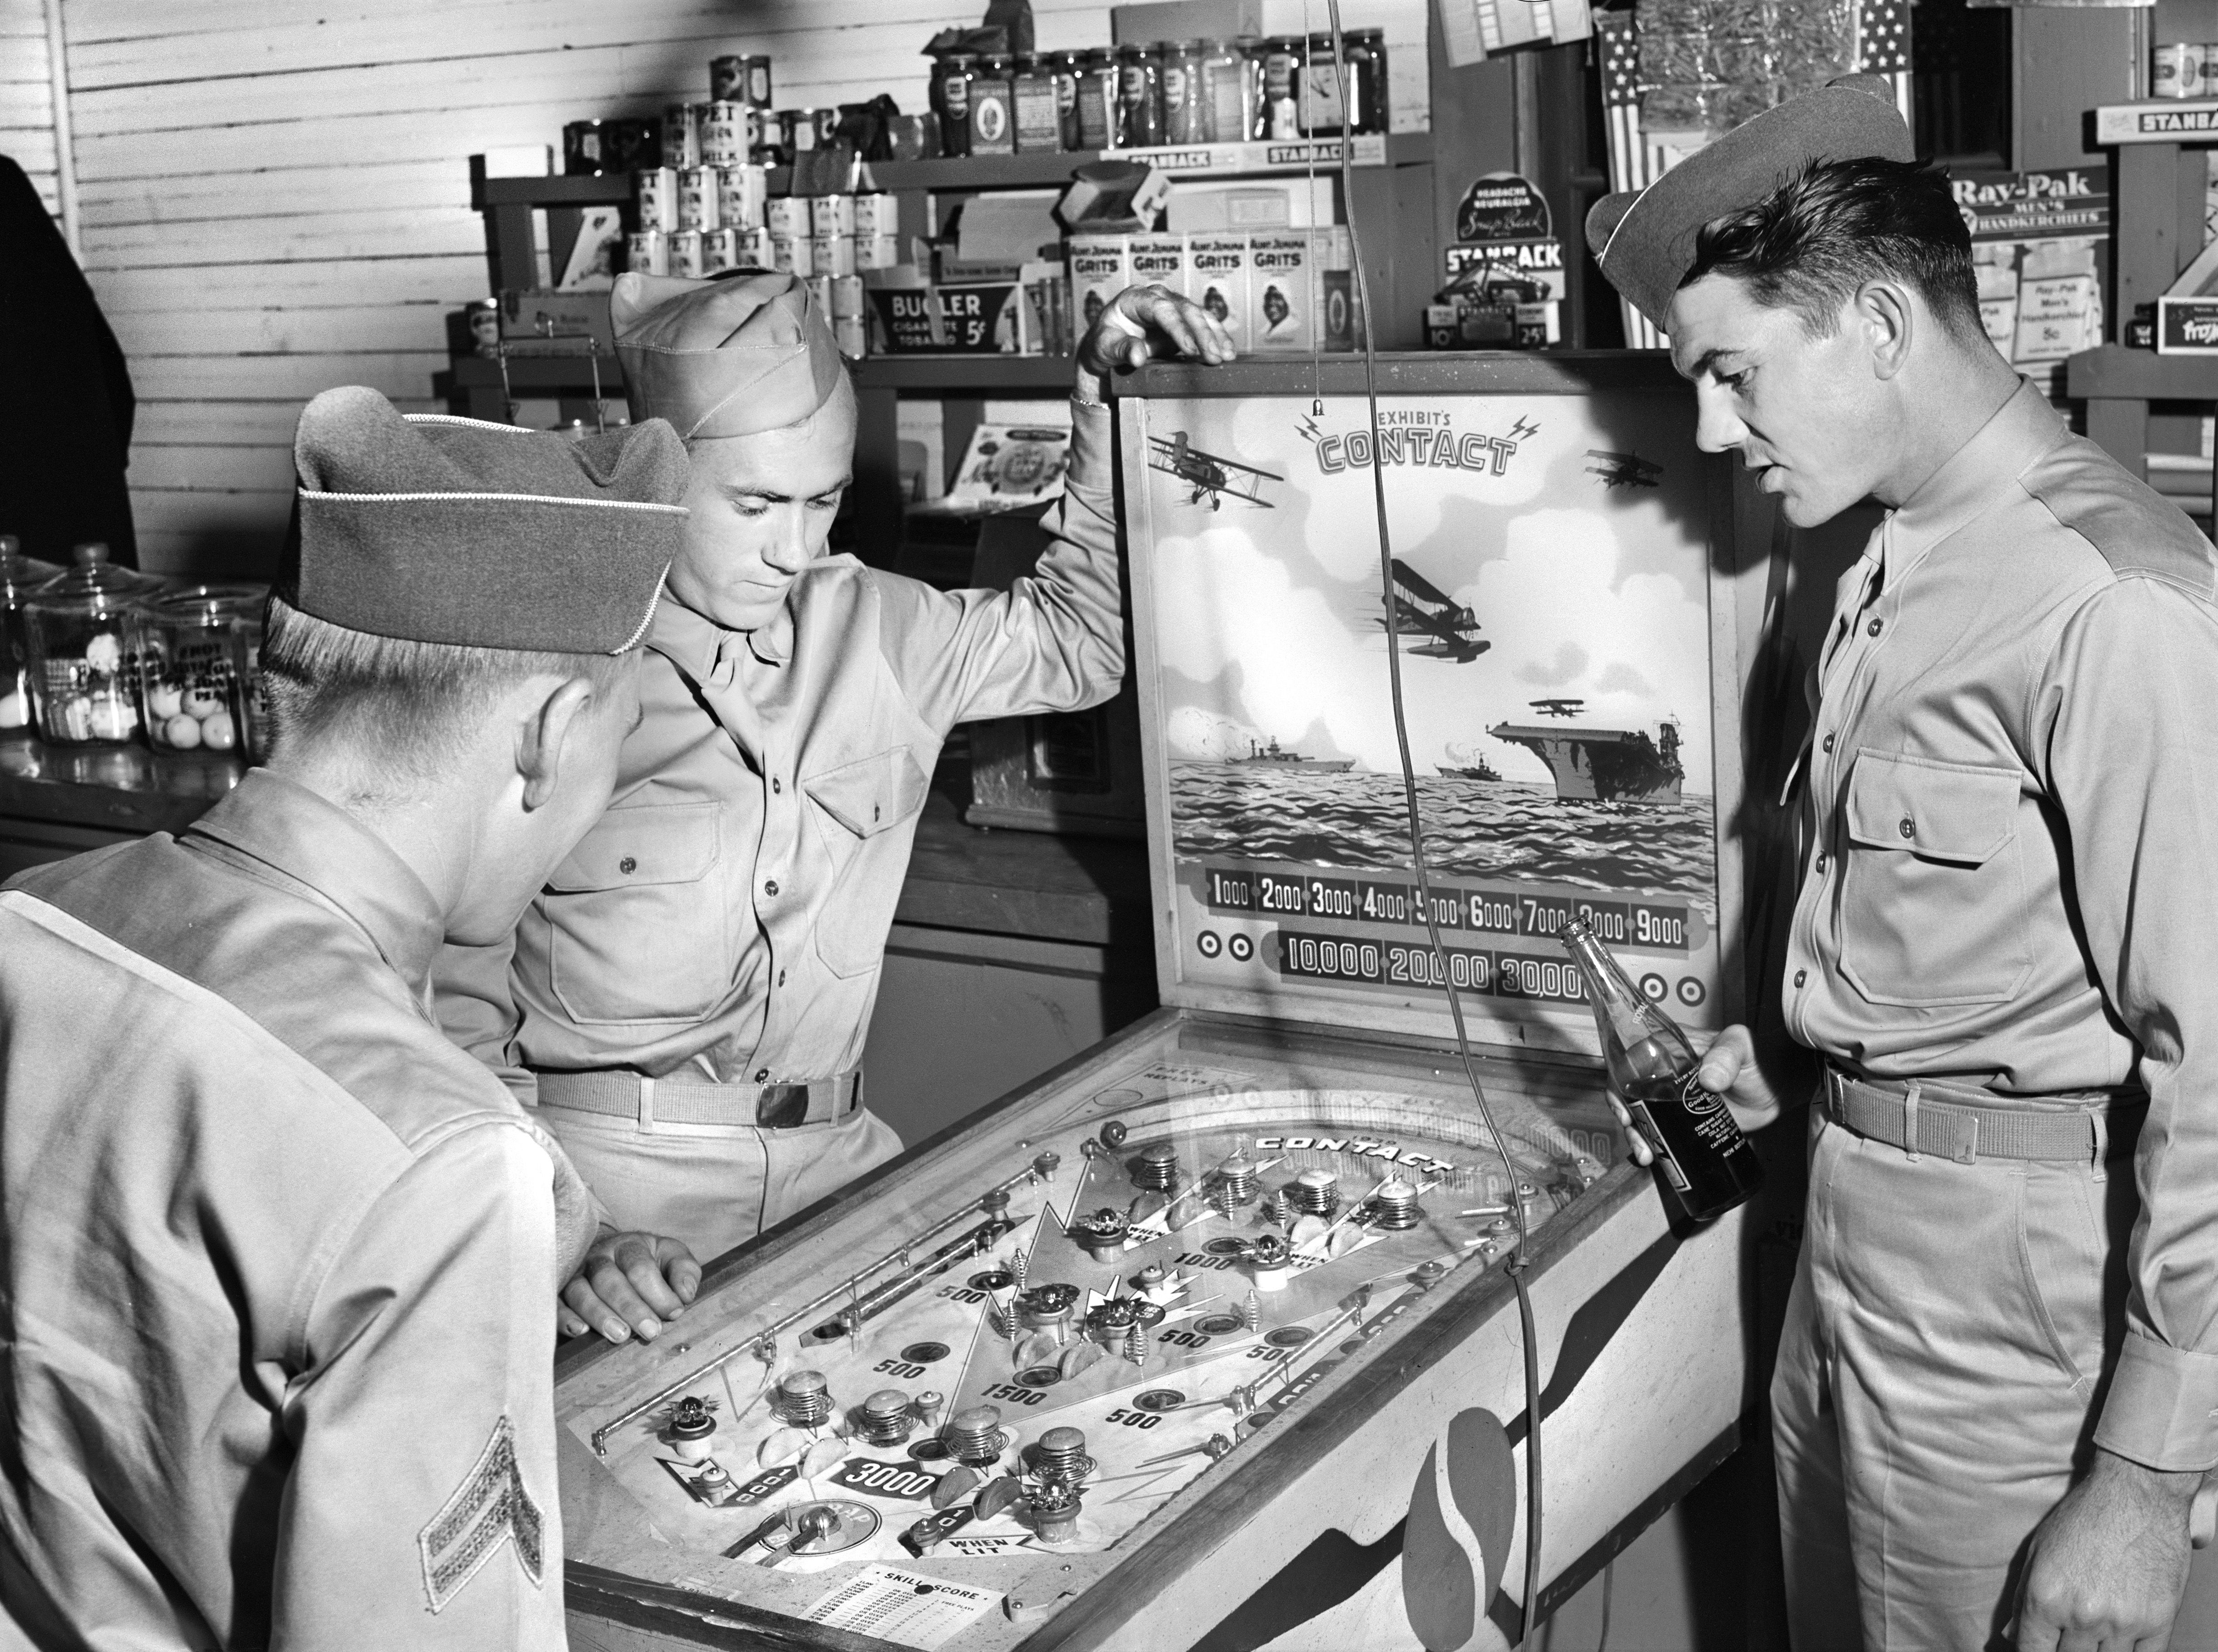 Soldiers playing pinball in 1941